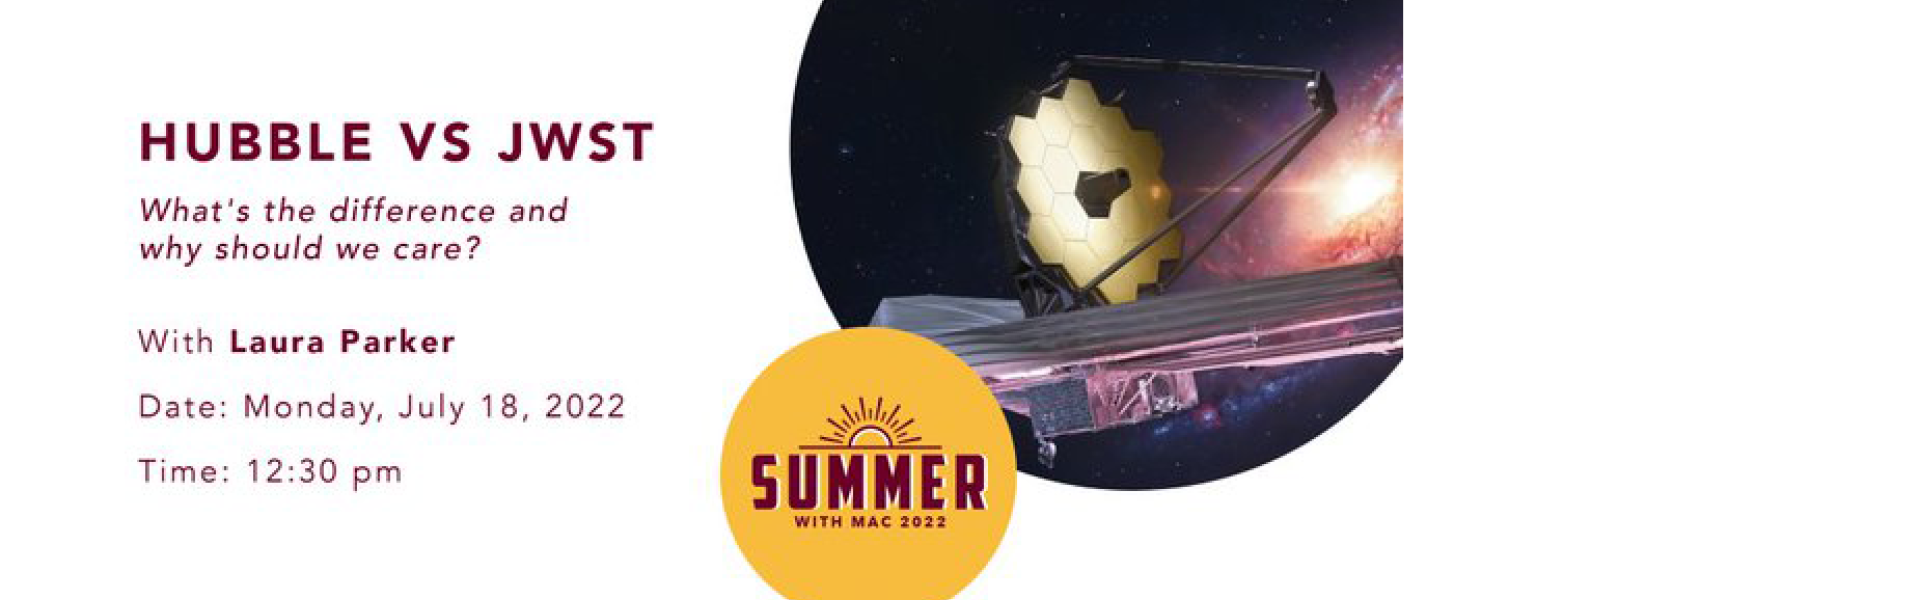 Hubble vs JWST. What’s the difference and why should we care?